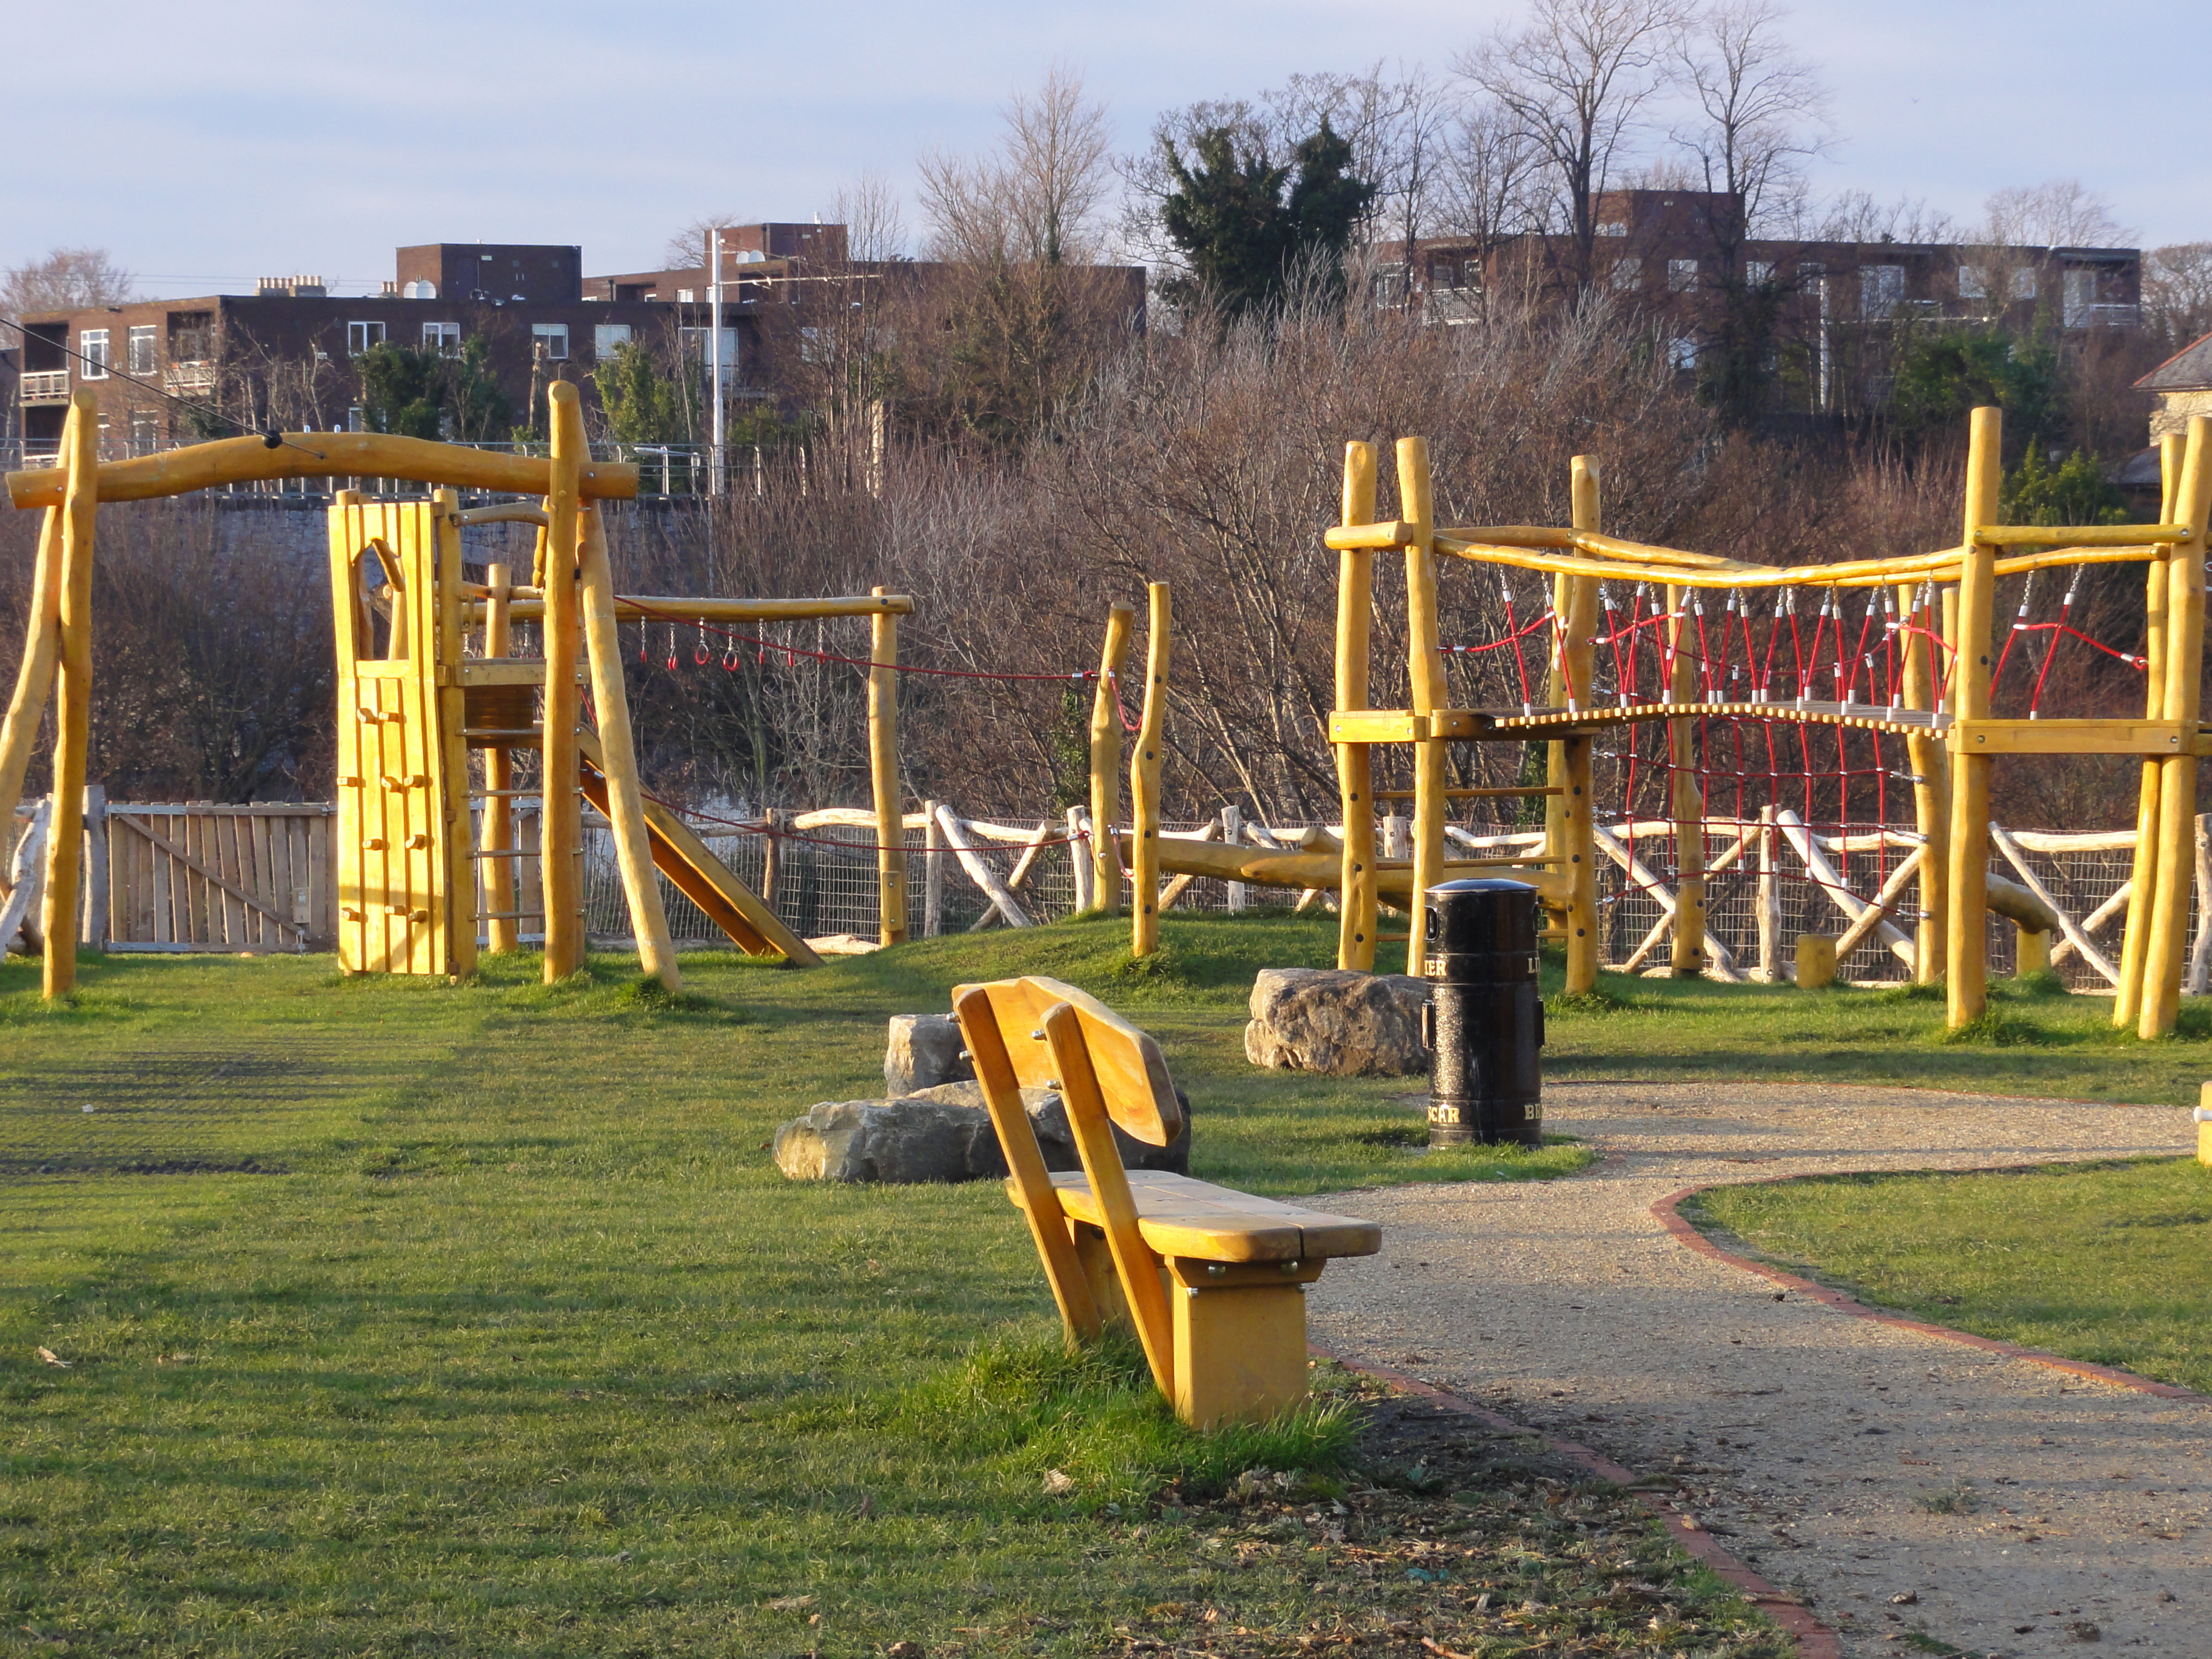 Playground for Patrick Doyle Road, located in Dublin